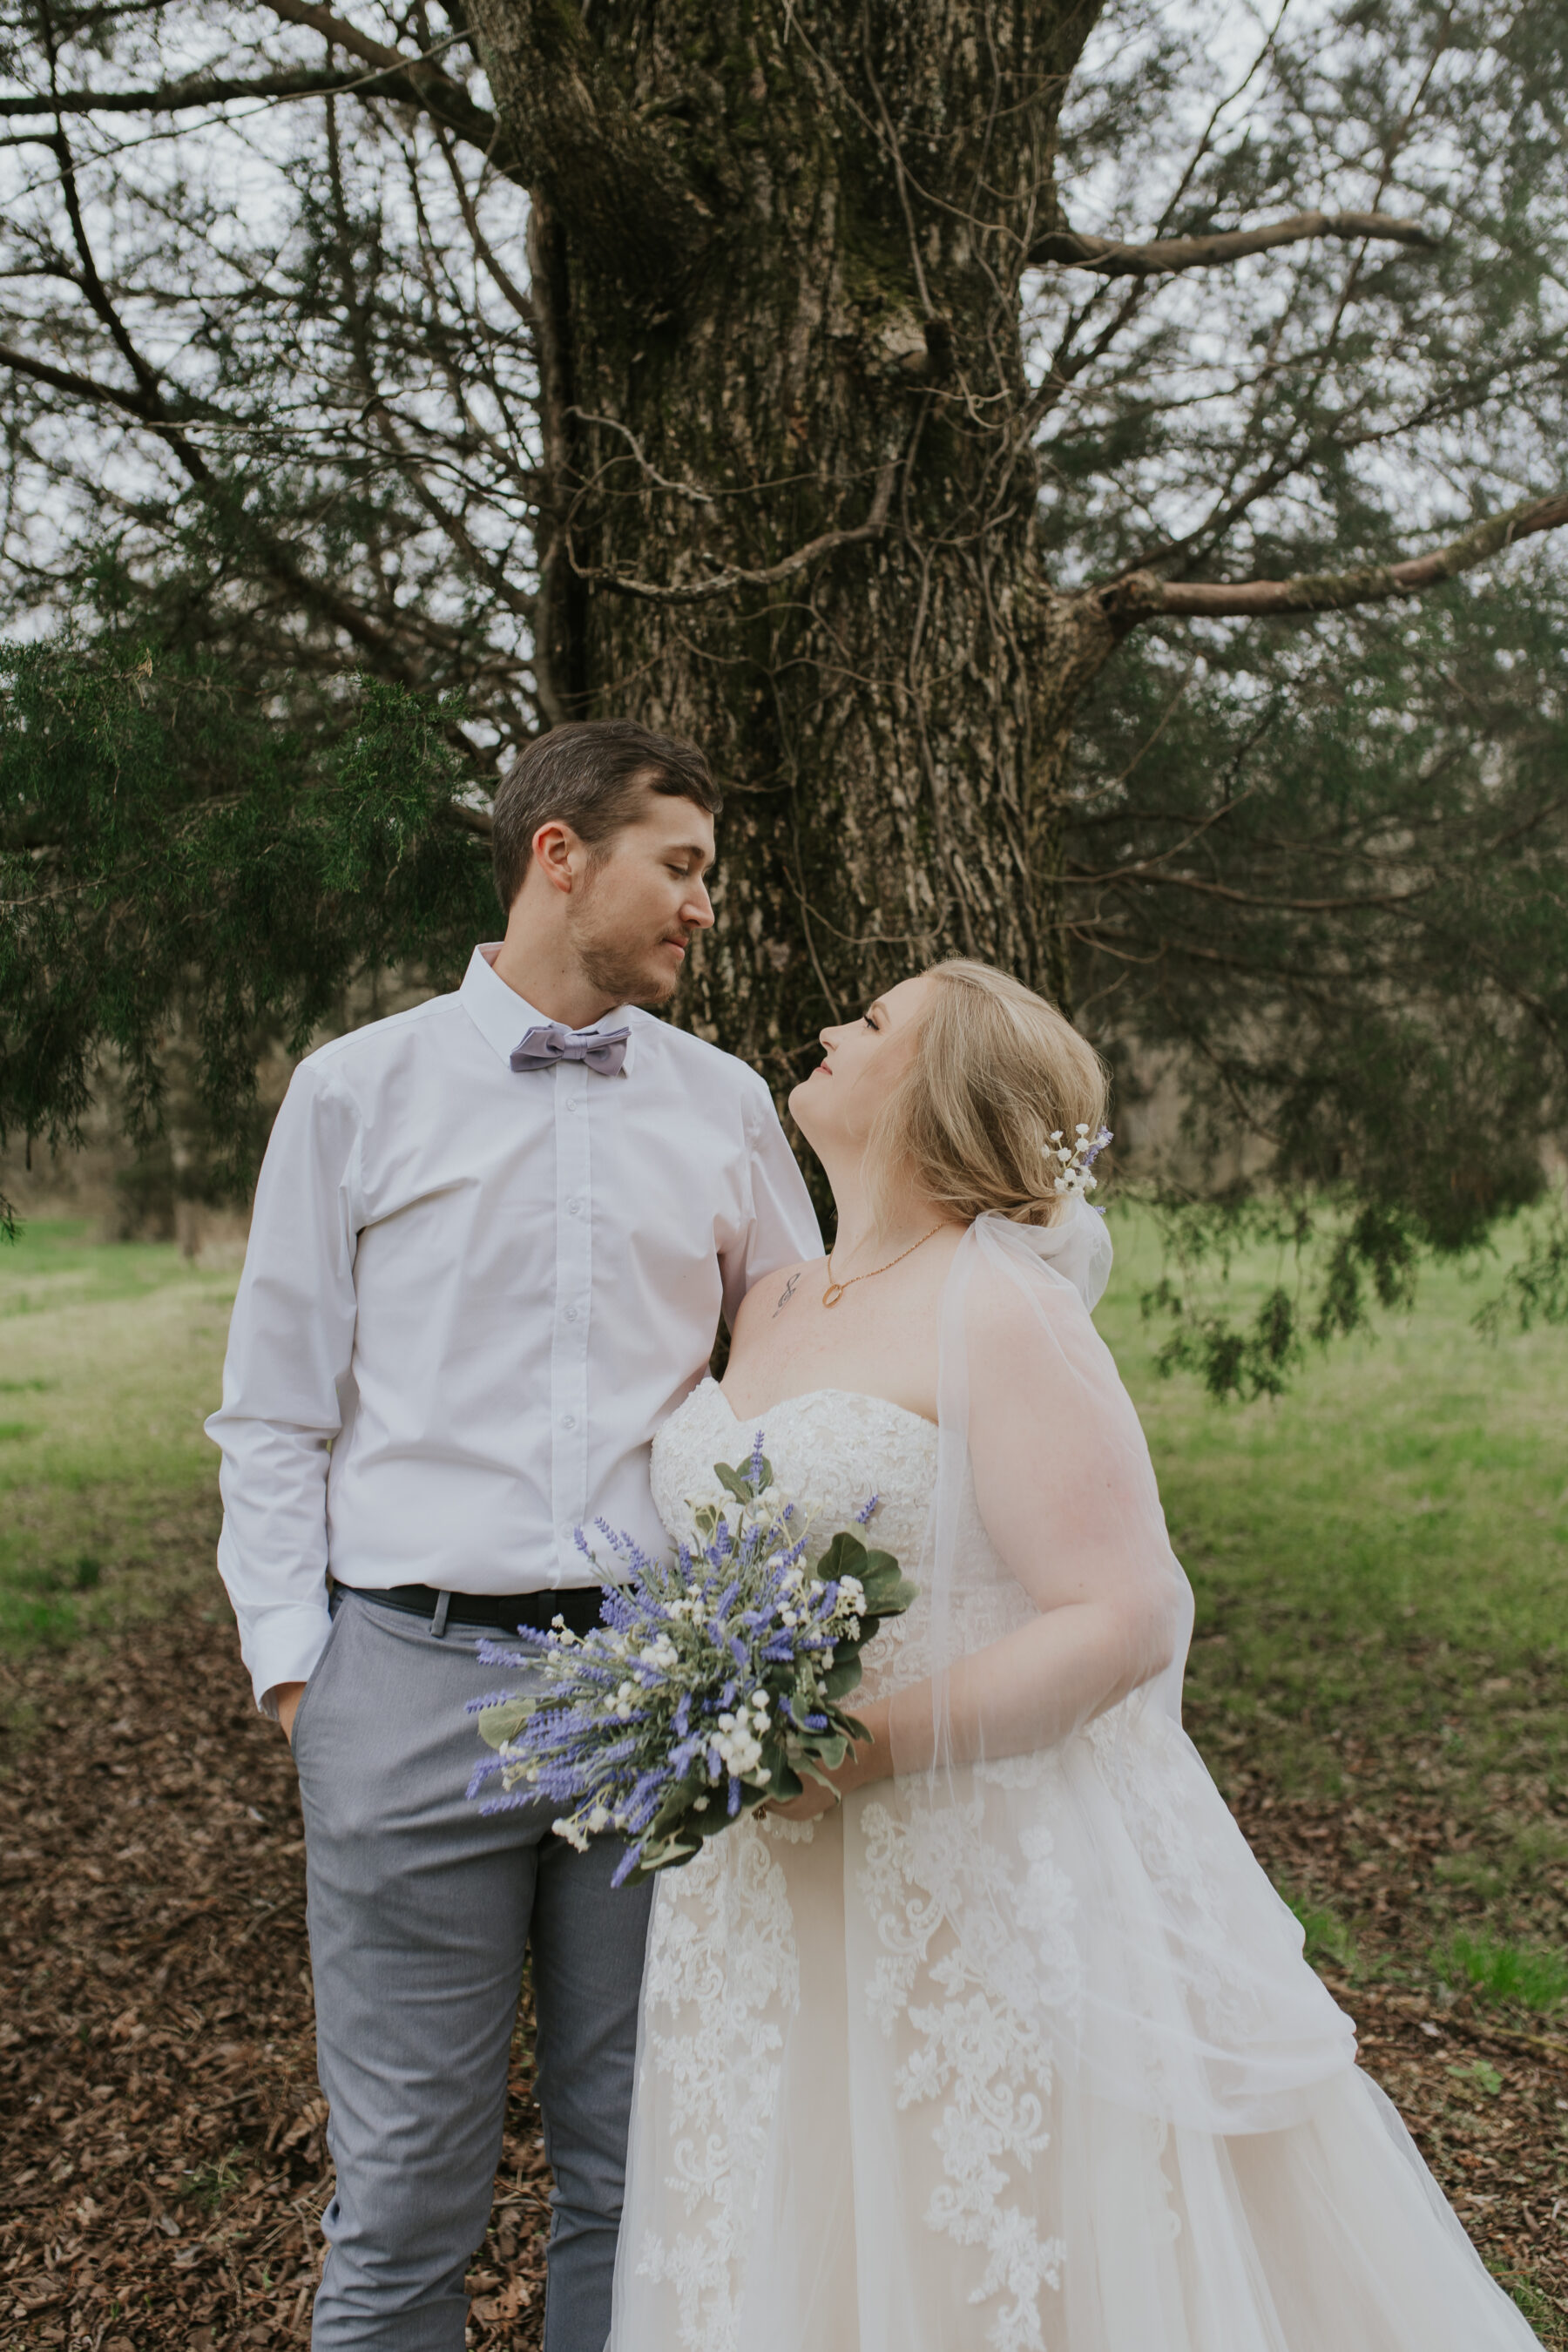 Intimate Backyard Wedding from Risen Vintage featured on Nashville Bride Guide